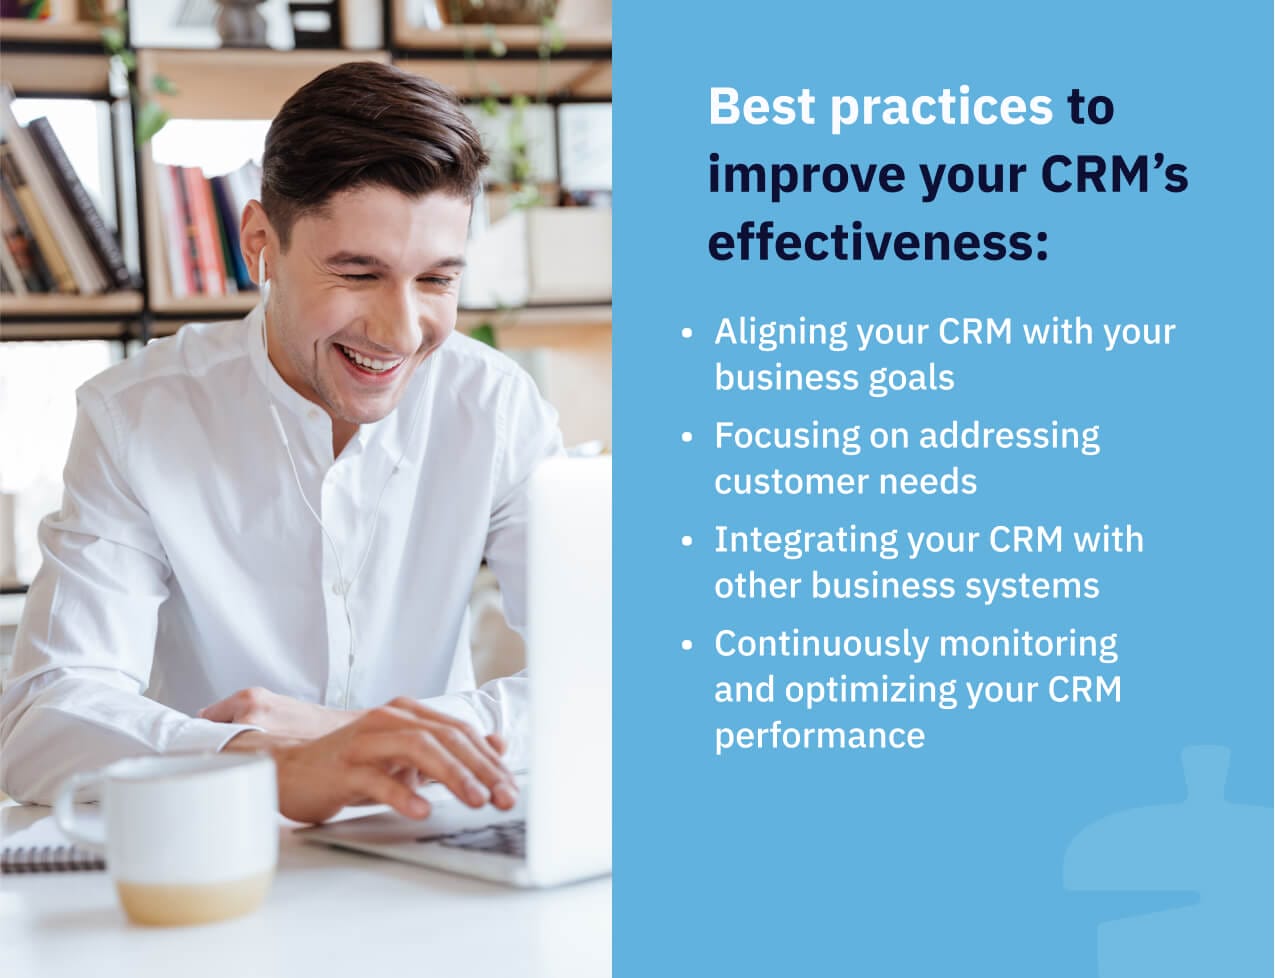 Best practices for a successful CRM strategy